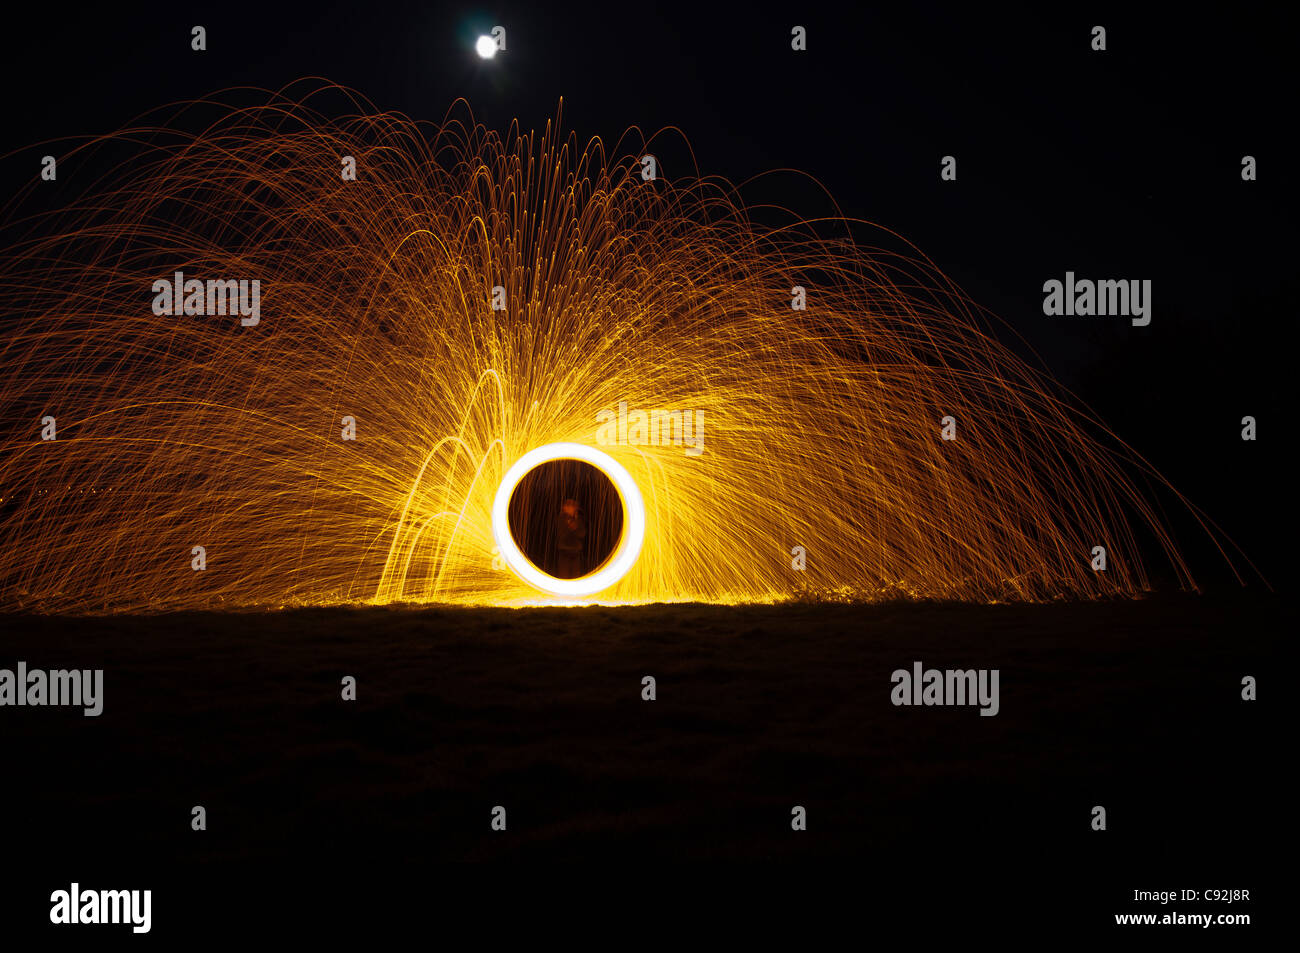 Steel wool spinning, creating gorgeous circular streaks of golden light from burning wire wool inside a whisk attached to wire, or rope. Stock Photo